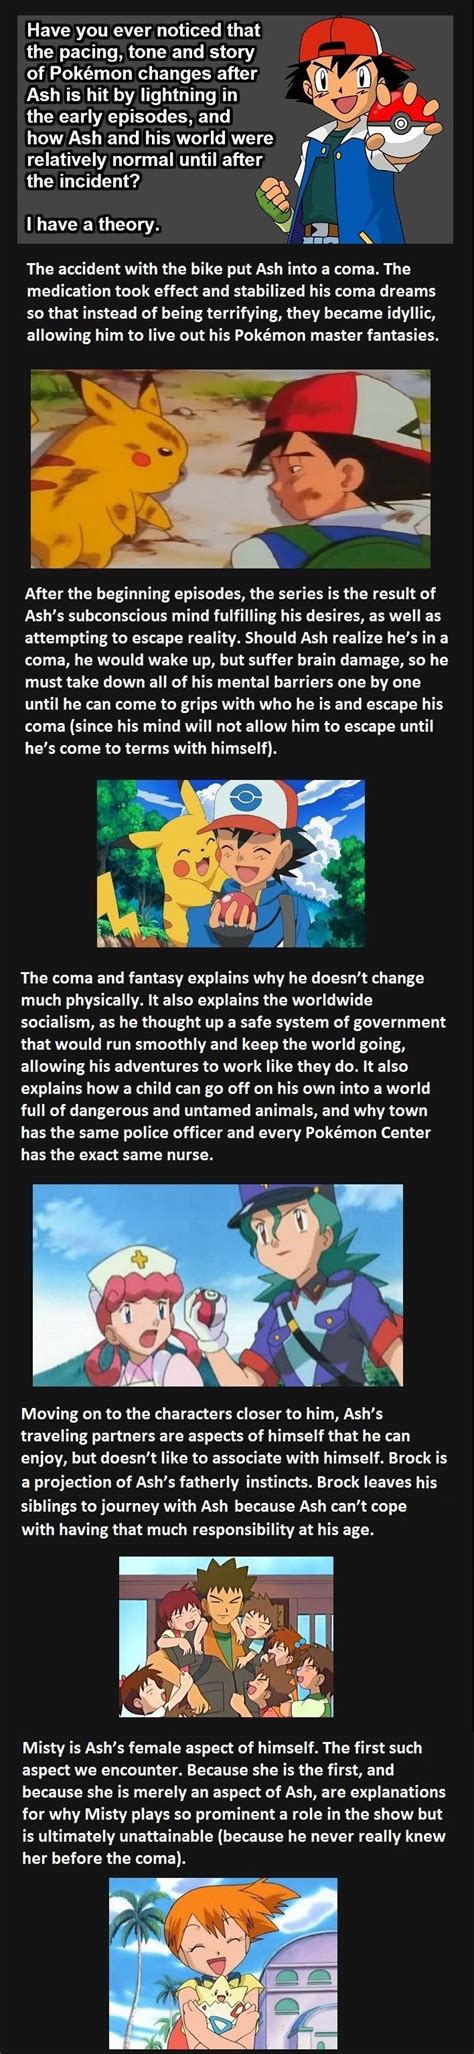 22 Pokemon Theory Ideas Pokemon Pokemon Theory Pokemon Facts